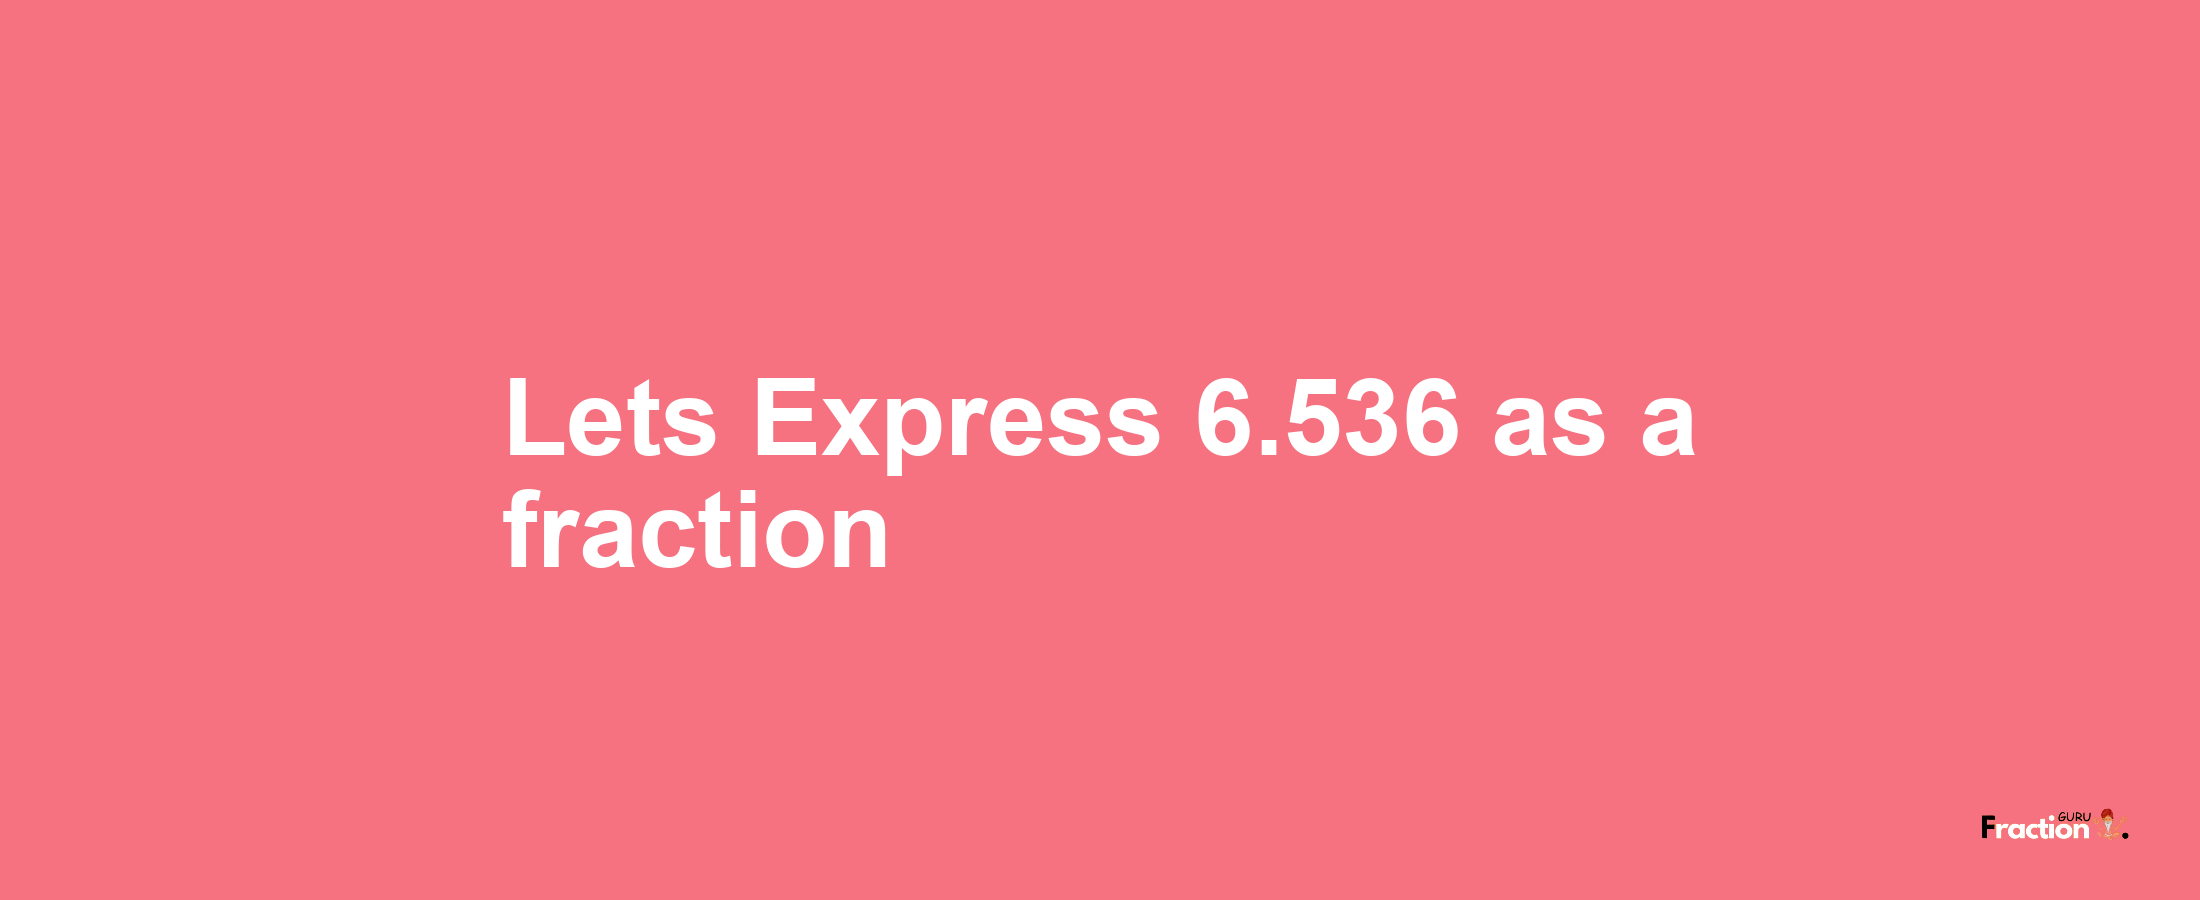 Lets Express 6.536 as afraction